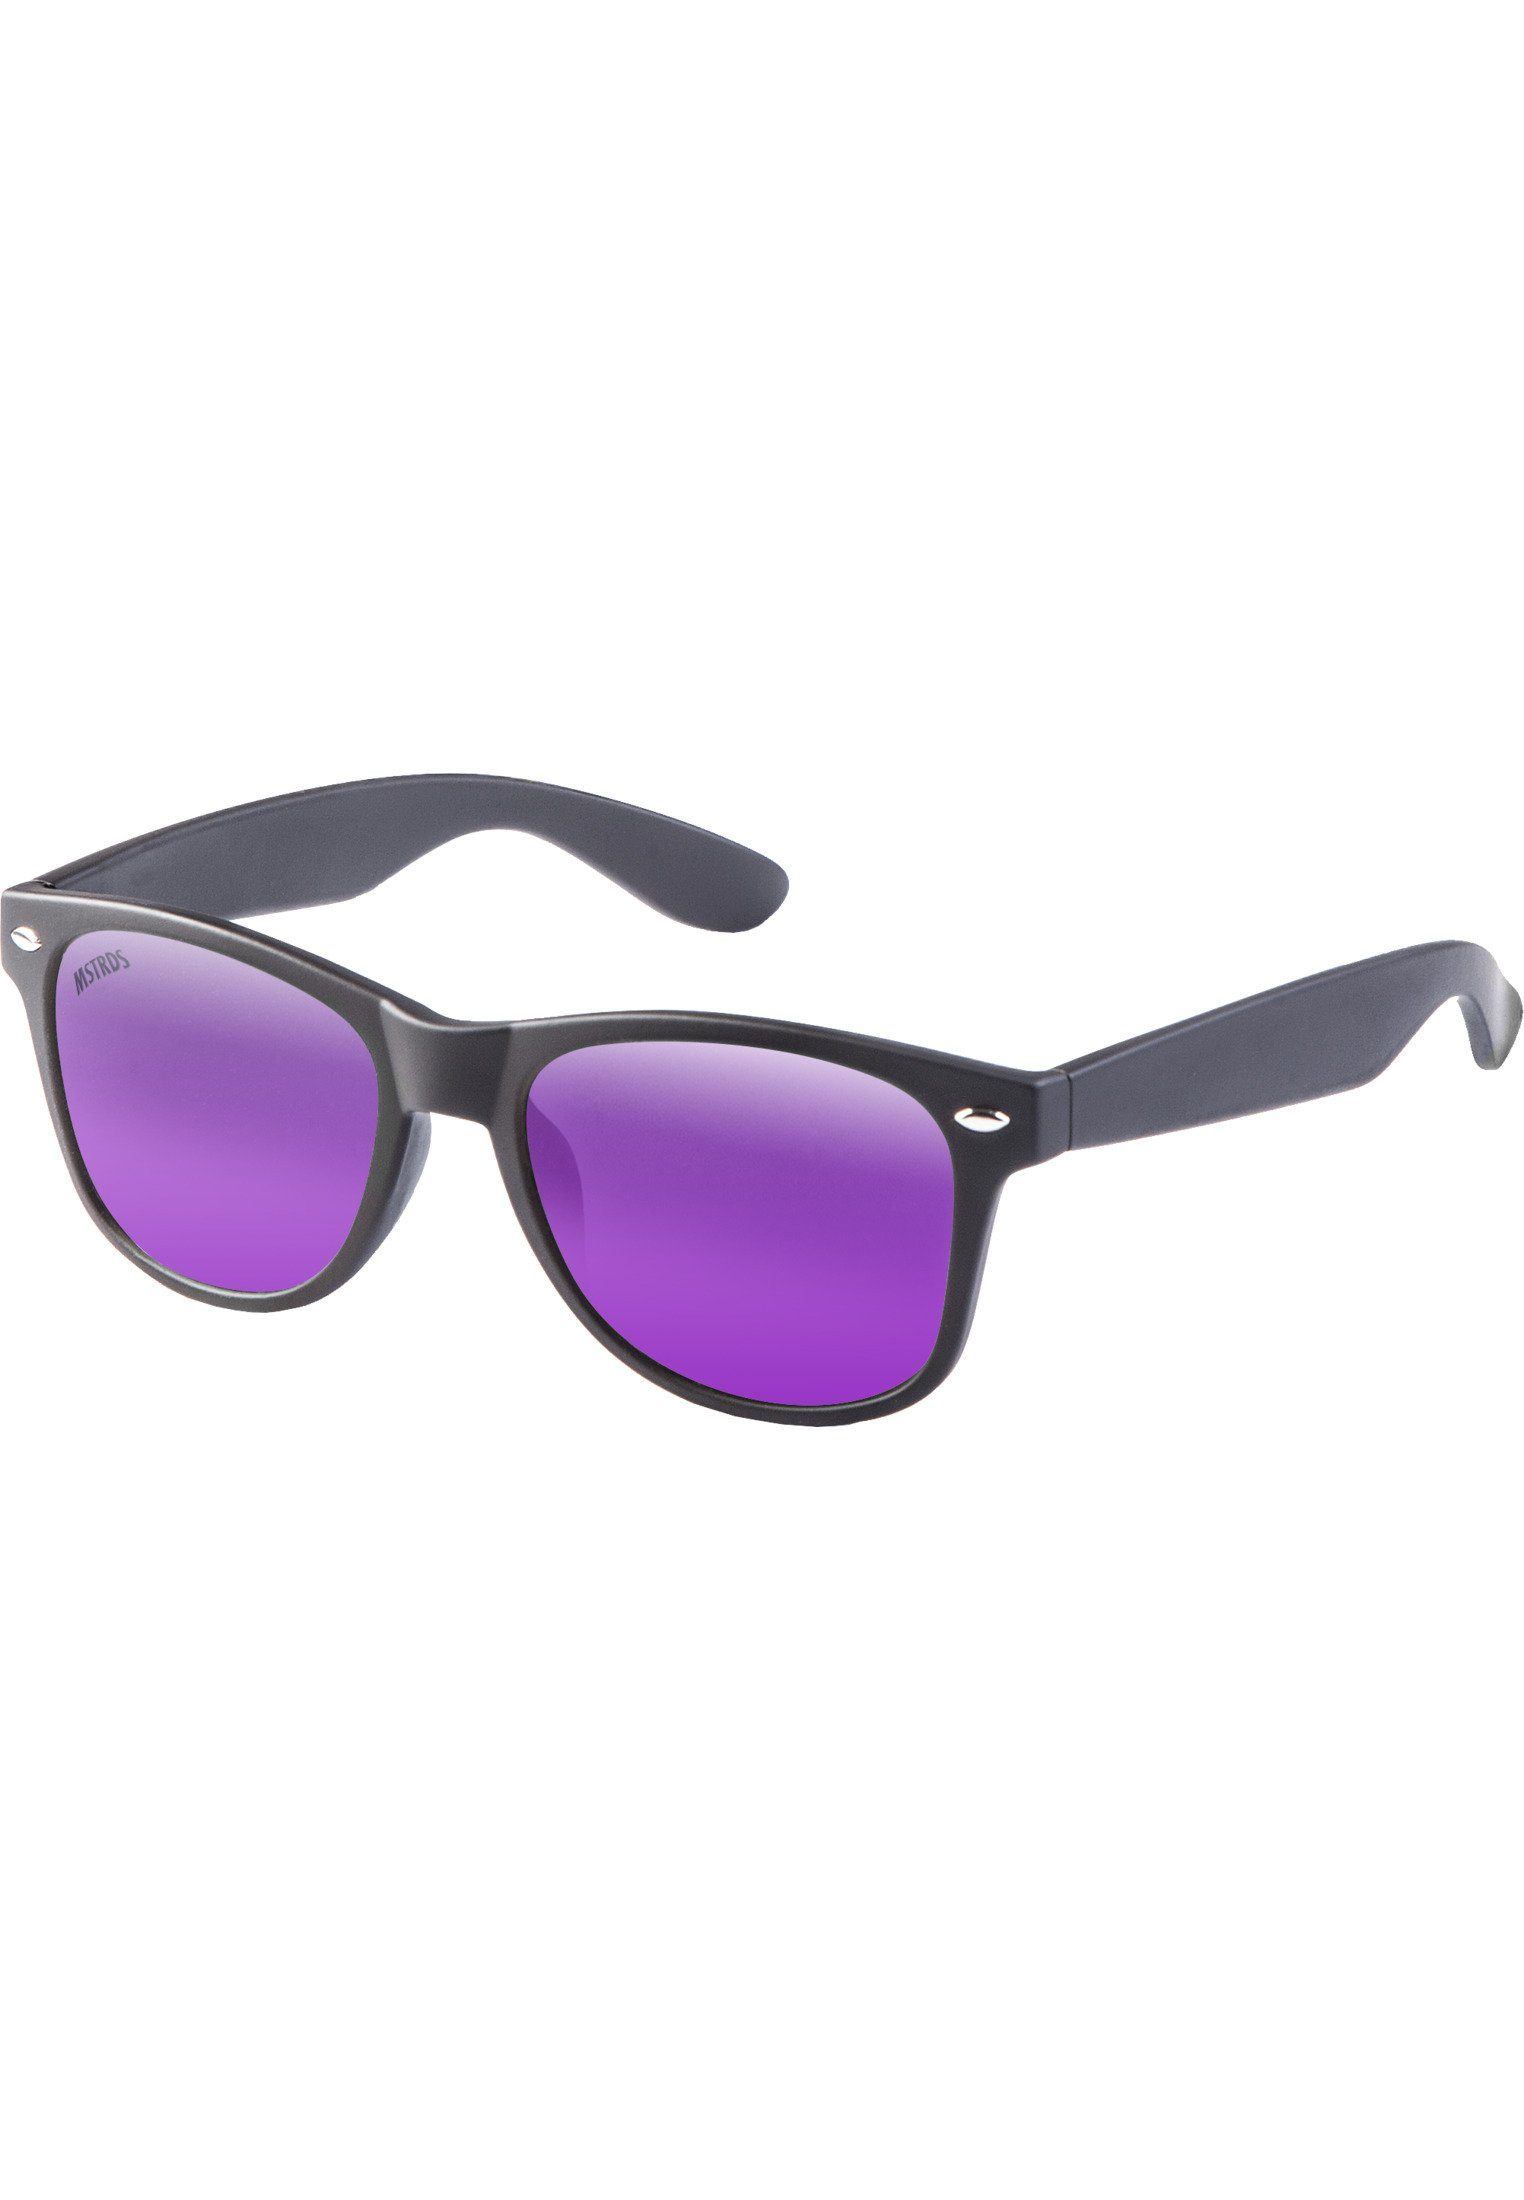 Sunglasses Sonnenbrille blk/pur MSTRDS Youth Accessoires Likoma